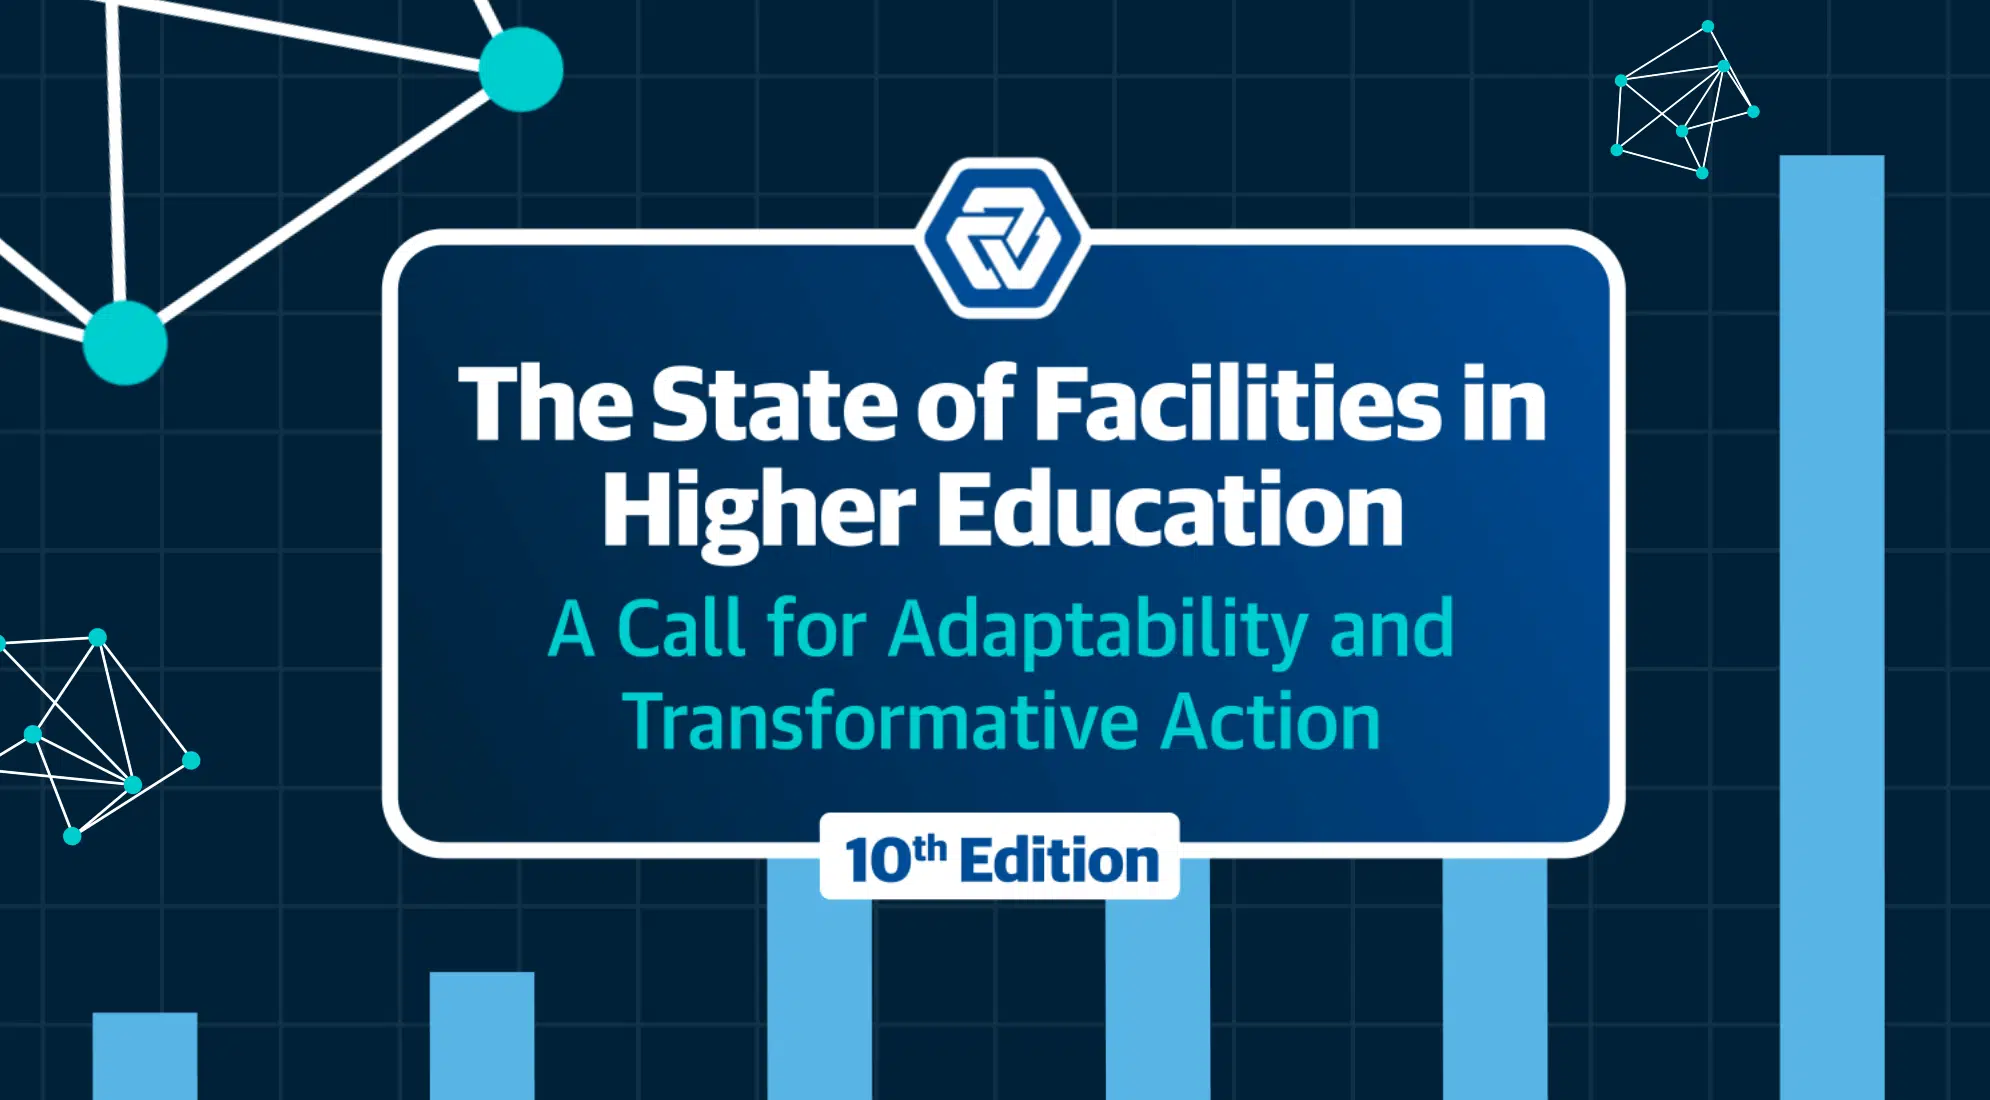 SPECIAL PREVIEW: The State of Facilities in Higher Education, 10th Edition 3